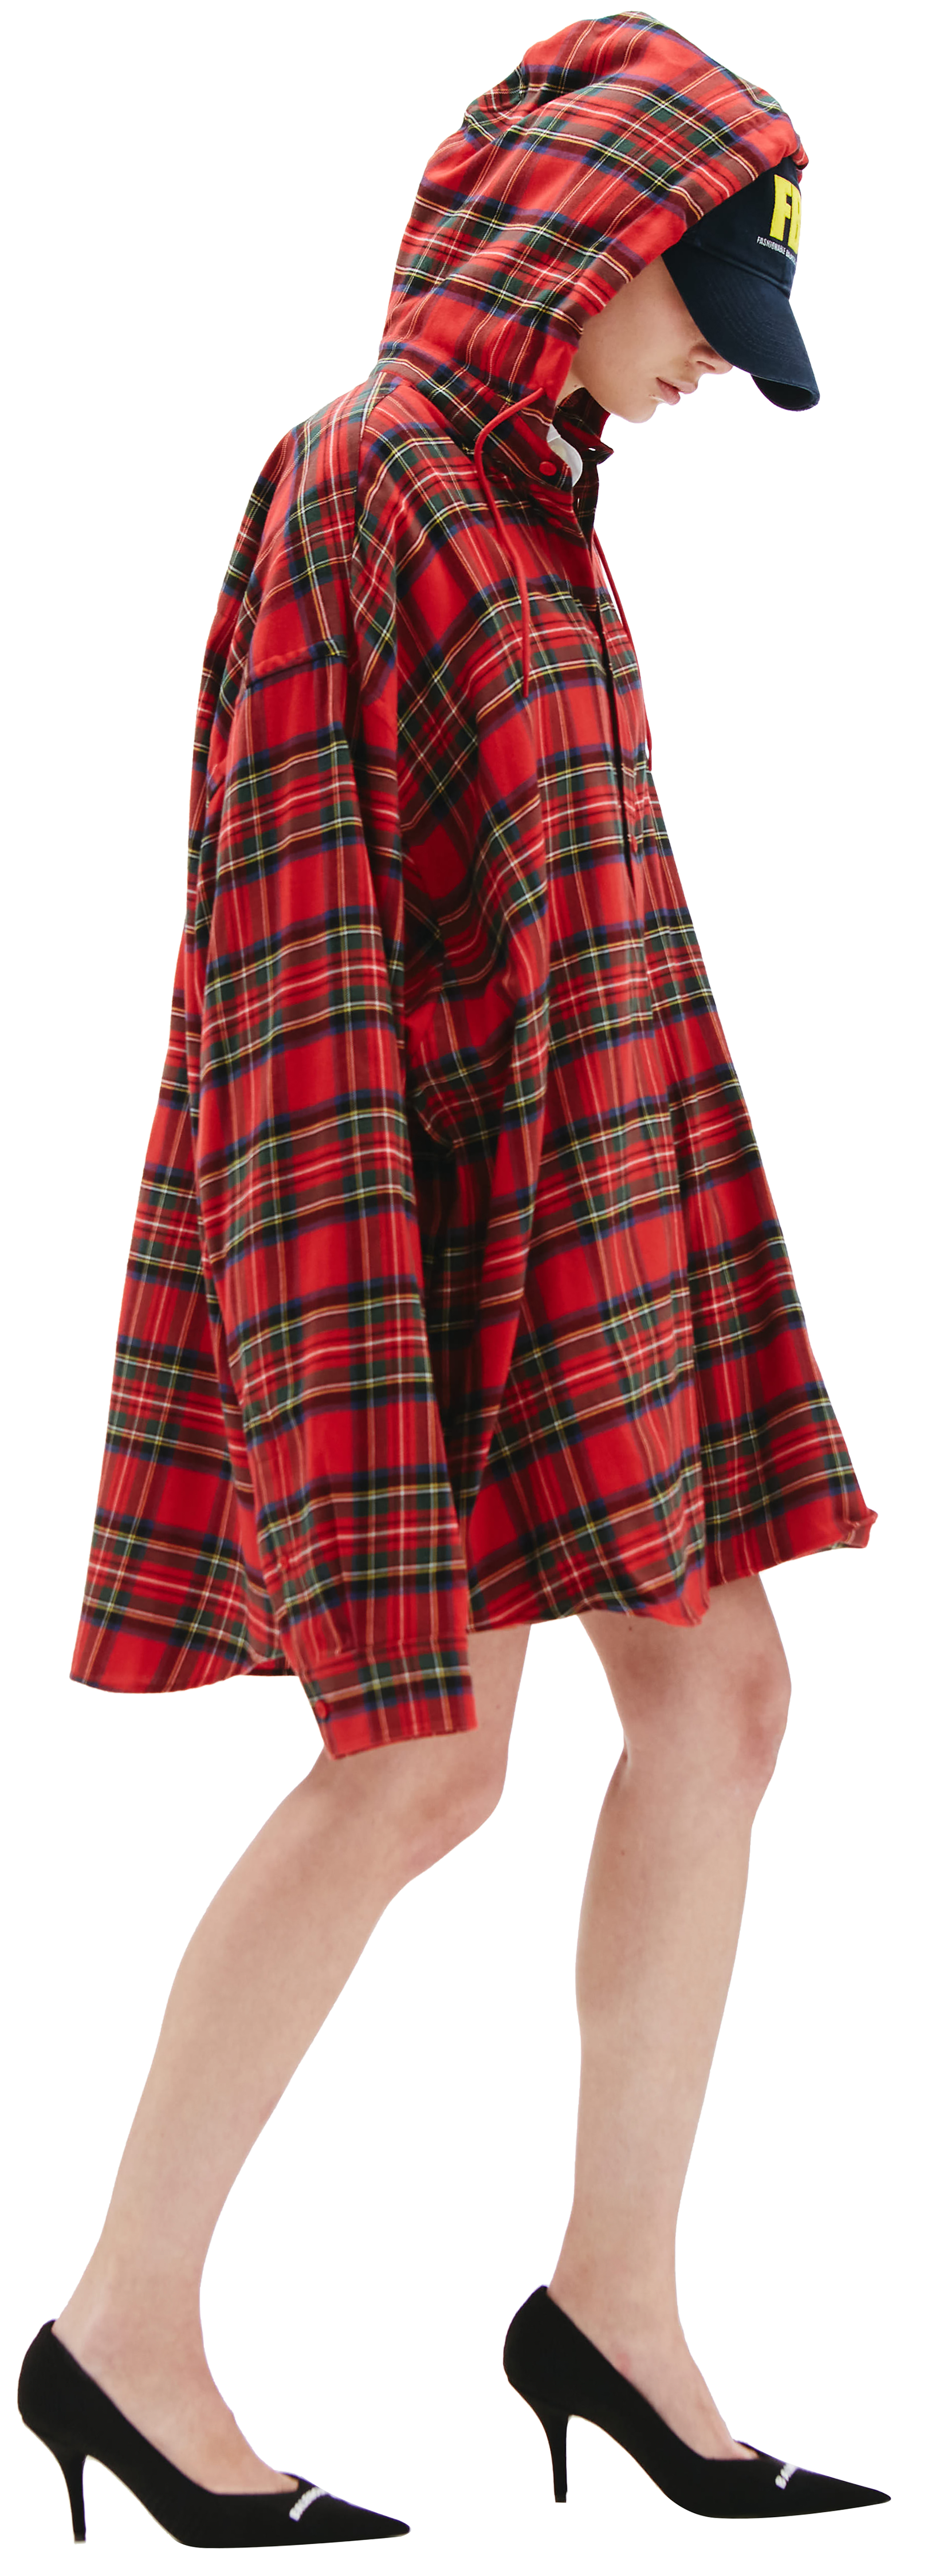 Astrolabio reloj Colectivo Buy Balenciaga women red hooded flannel check shirt for £1,065 online on  SV77, 681003/TLM19/6400